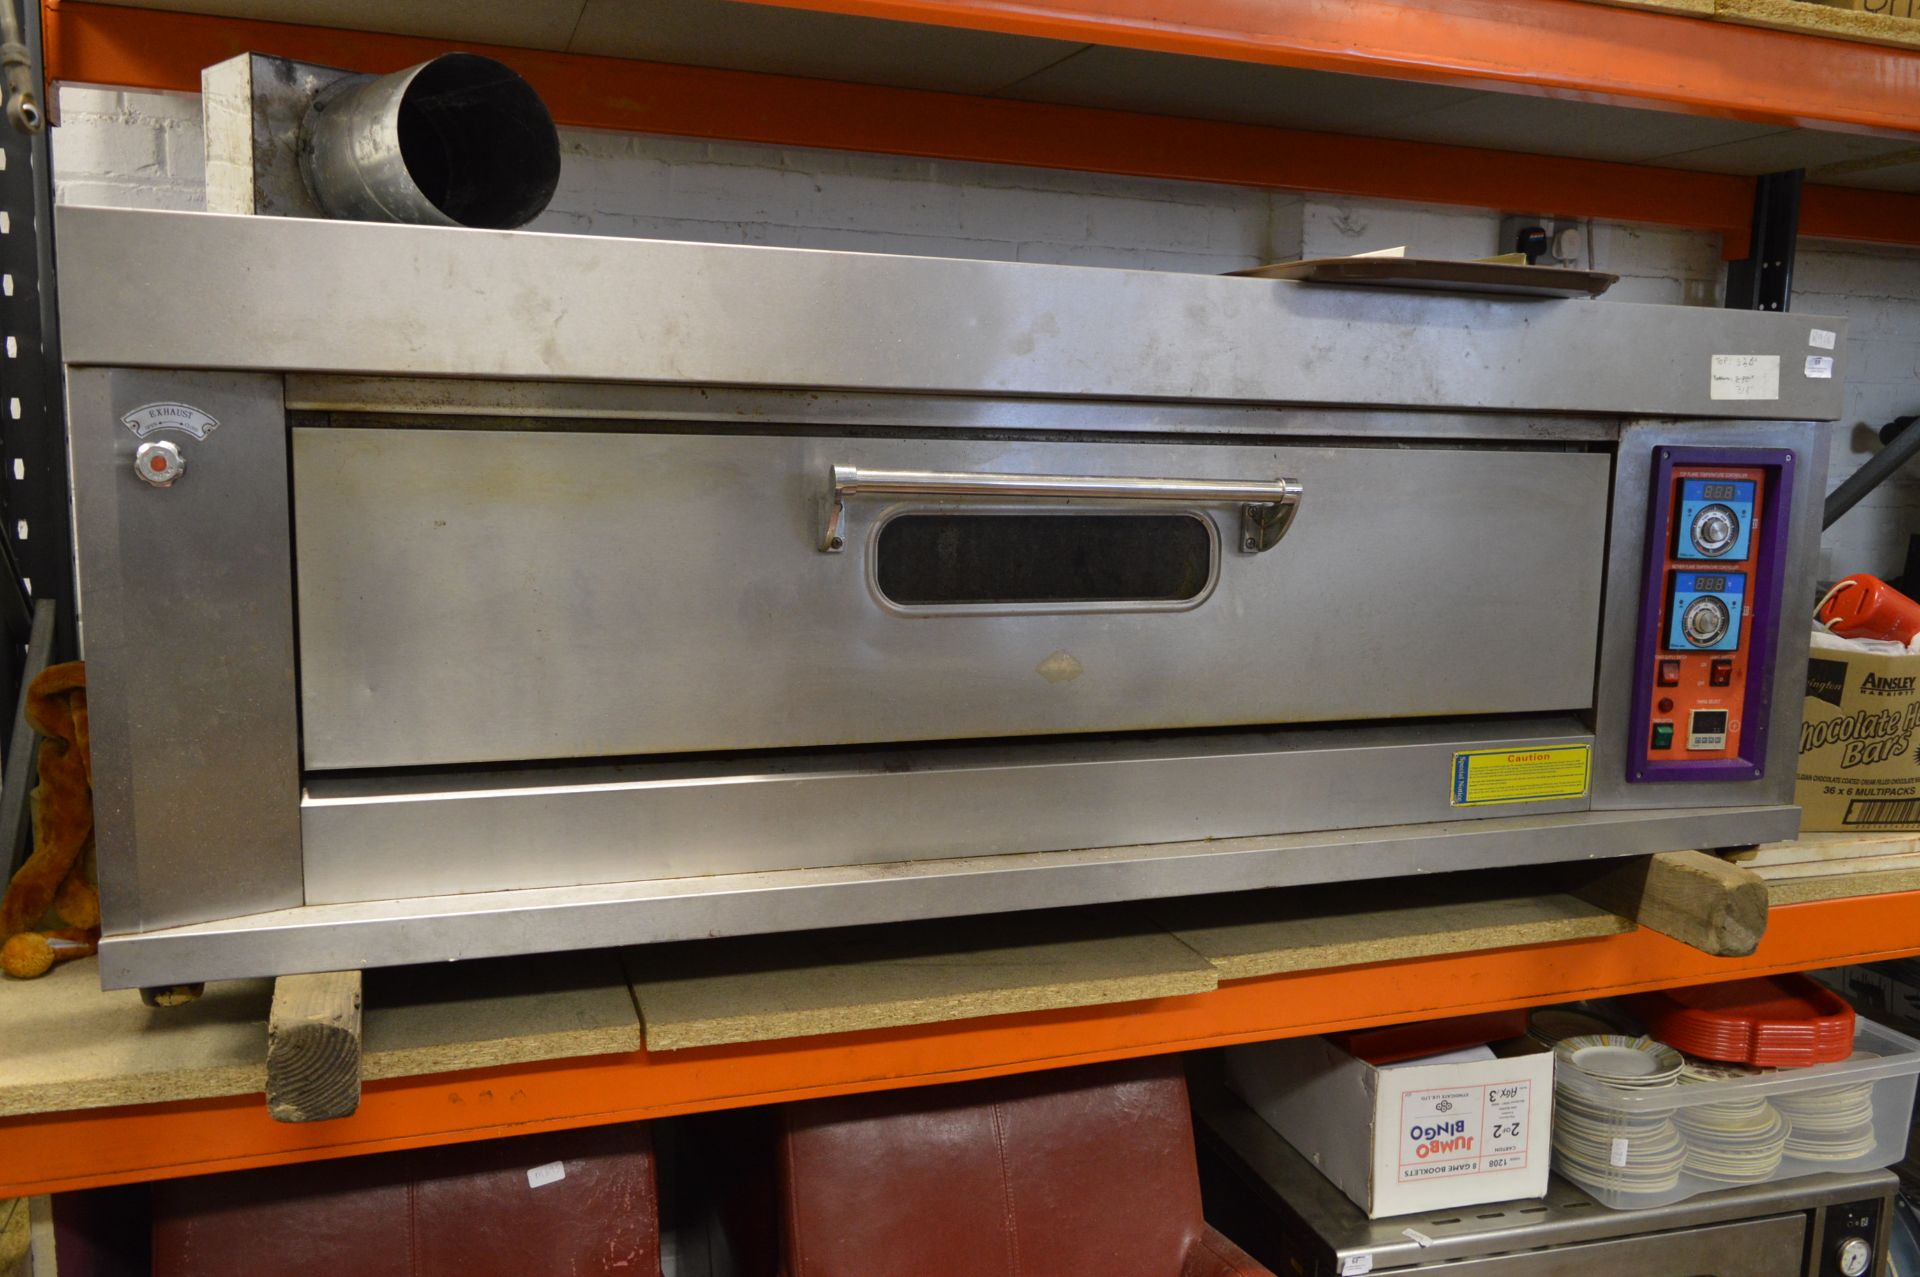 Advance Gas Model:YXY-30A Single Deck Pizza Oven